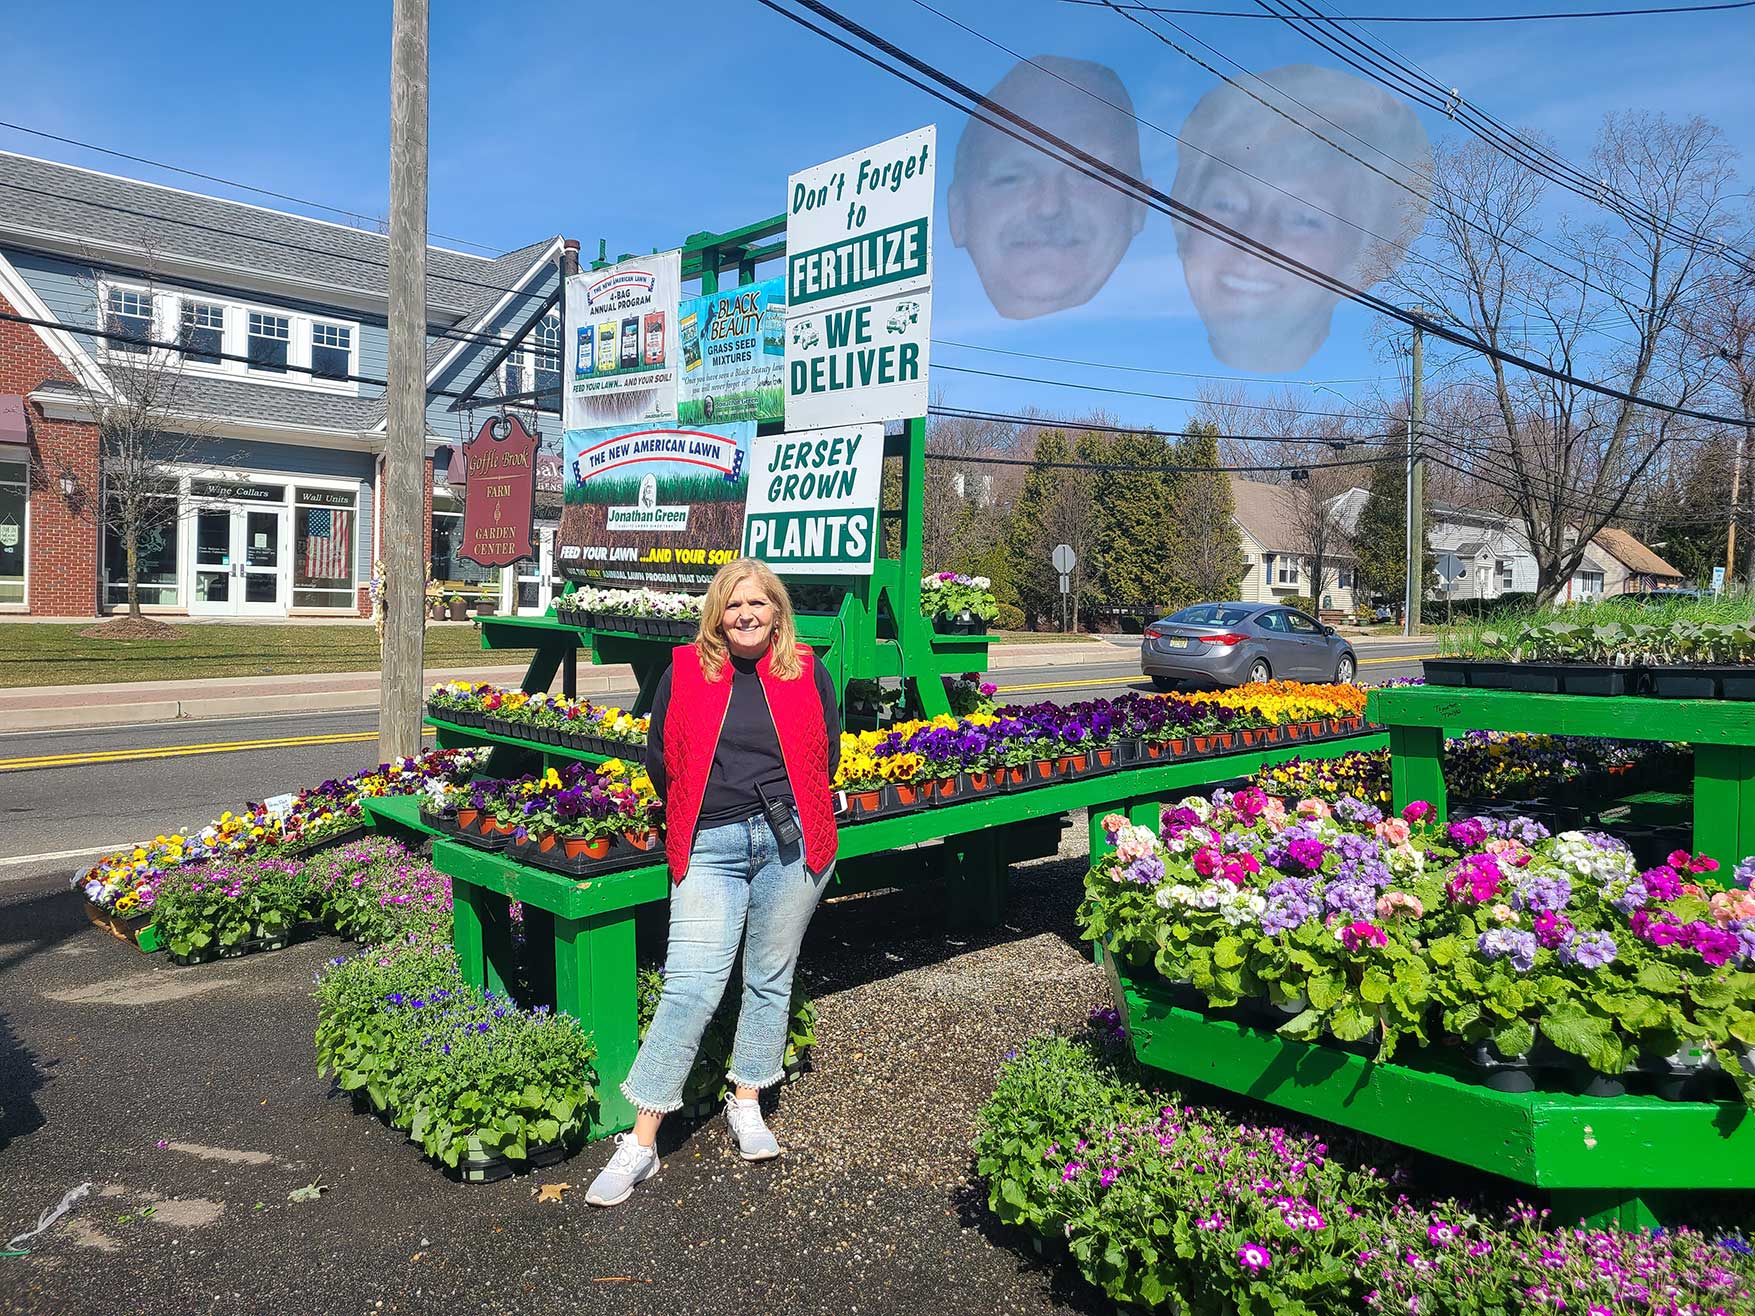 Goffle Brook Farms, founded by Richard and Dancy Osborne, was first opened on May 1st, 1968, and for the 54th straight year locals know spring has sprung when the pansies start to appear at Goffle Brook Farm